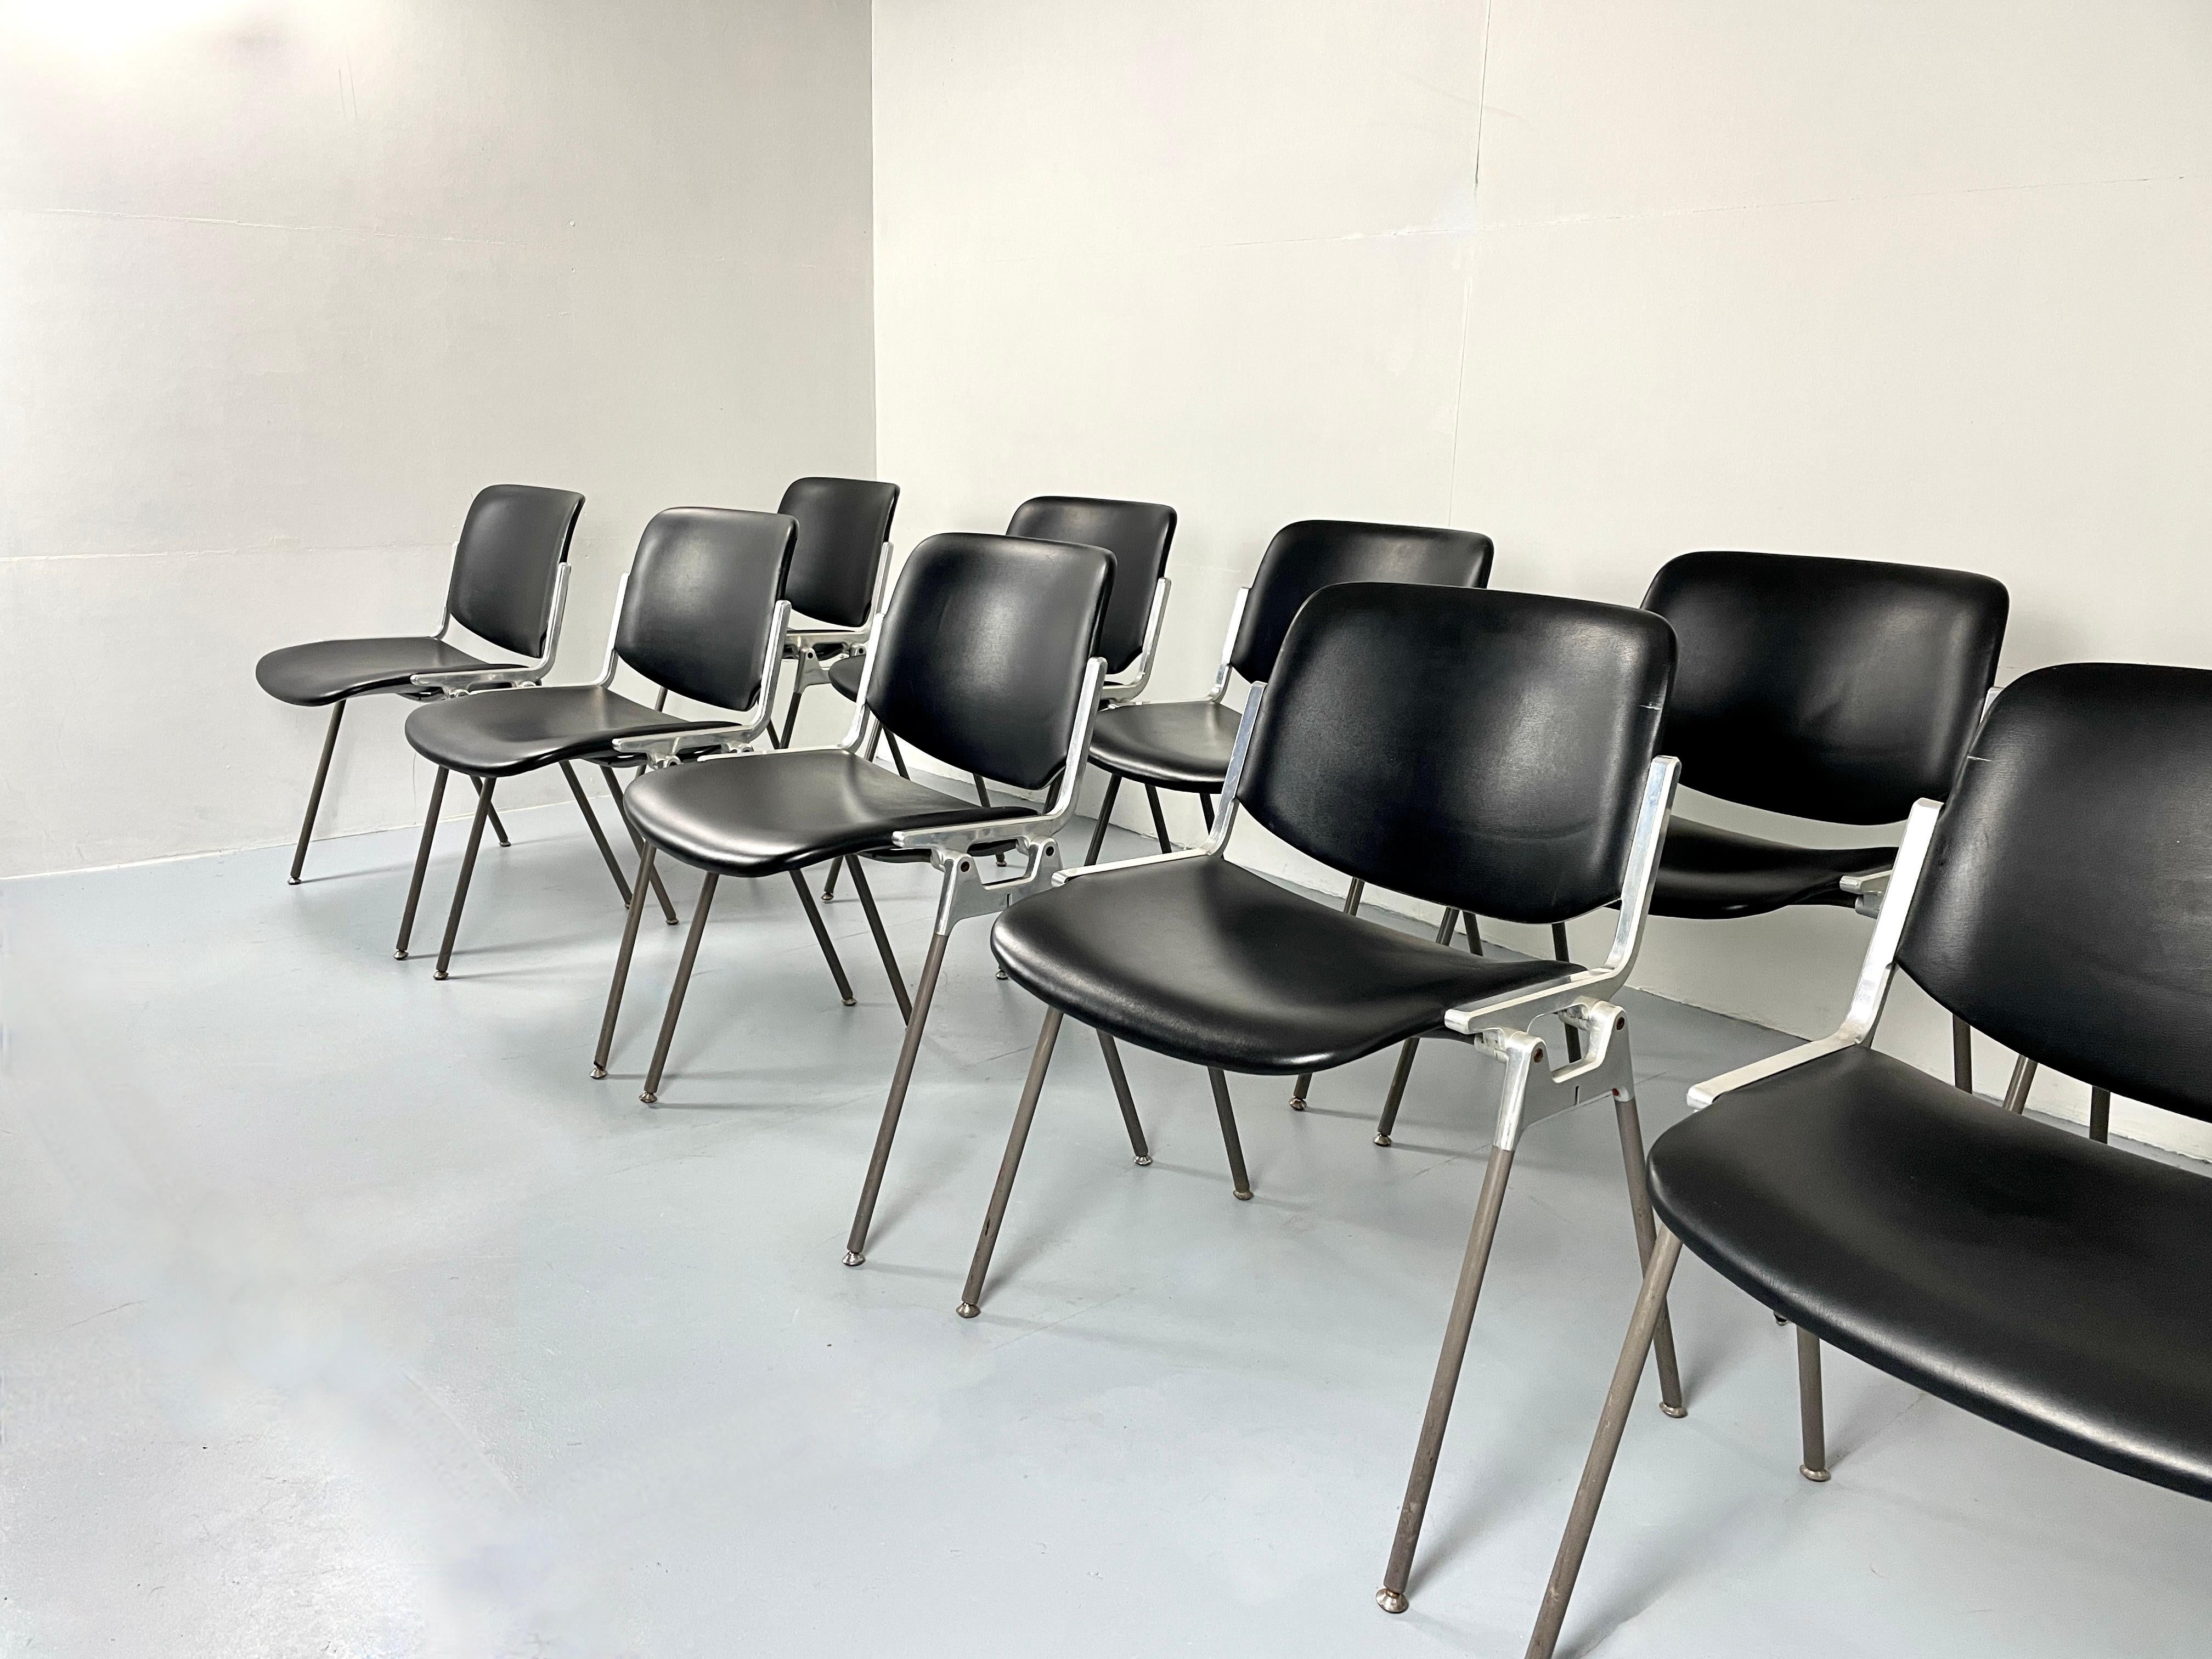 Iconic Italian stacking chairs by Giancarlo Piretti for Anonima Castelli.

DSC 106 is one of the most famous chairs of the castelli brand. designed in 1965 by giancarlo piretti, it is still an object with an innovative and fascinating design.